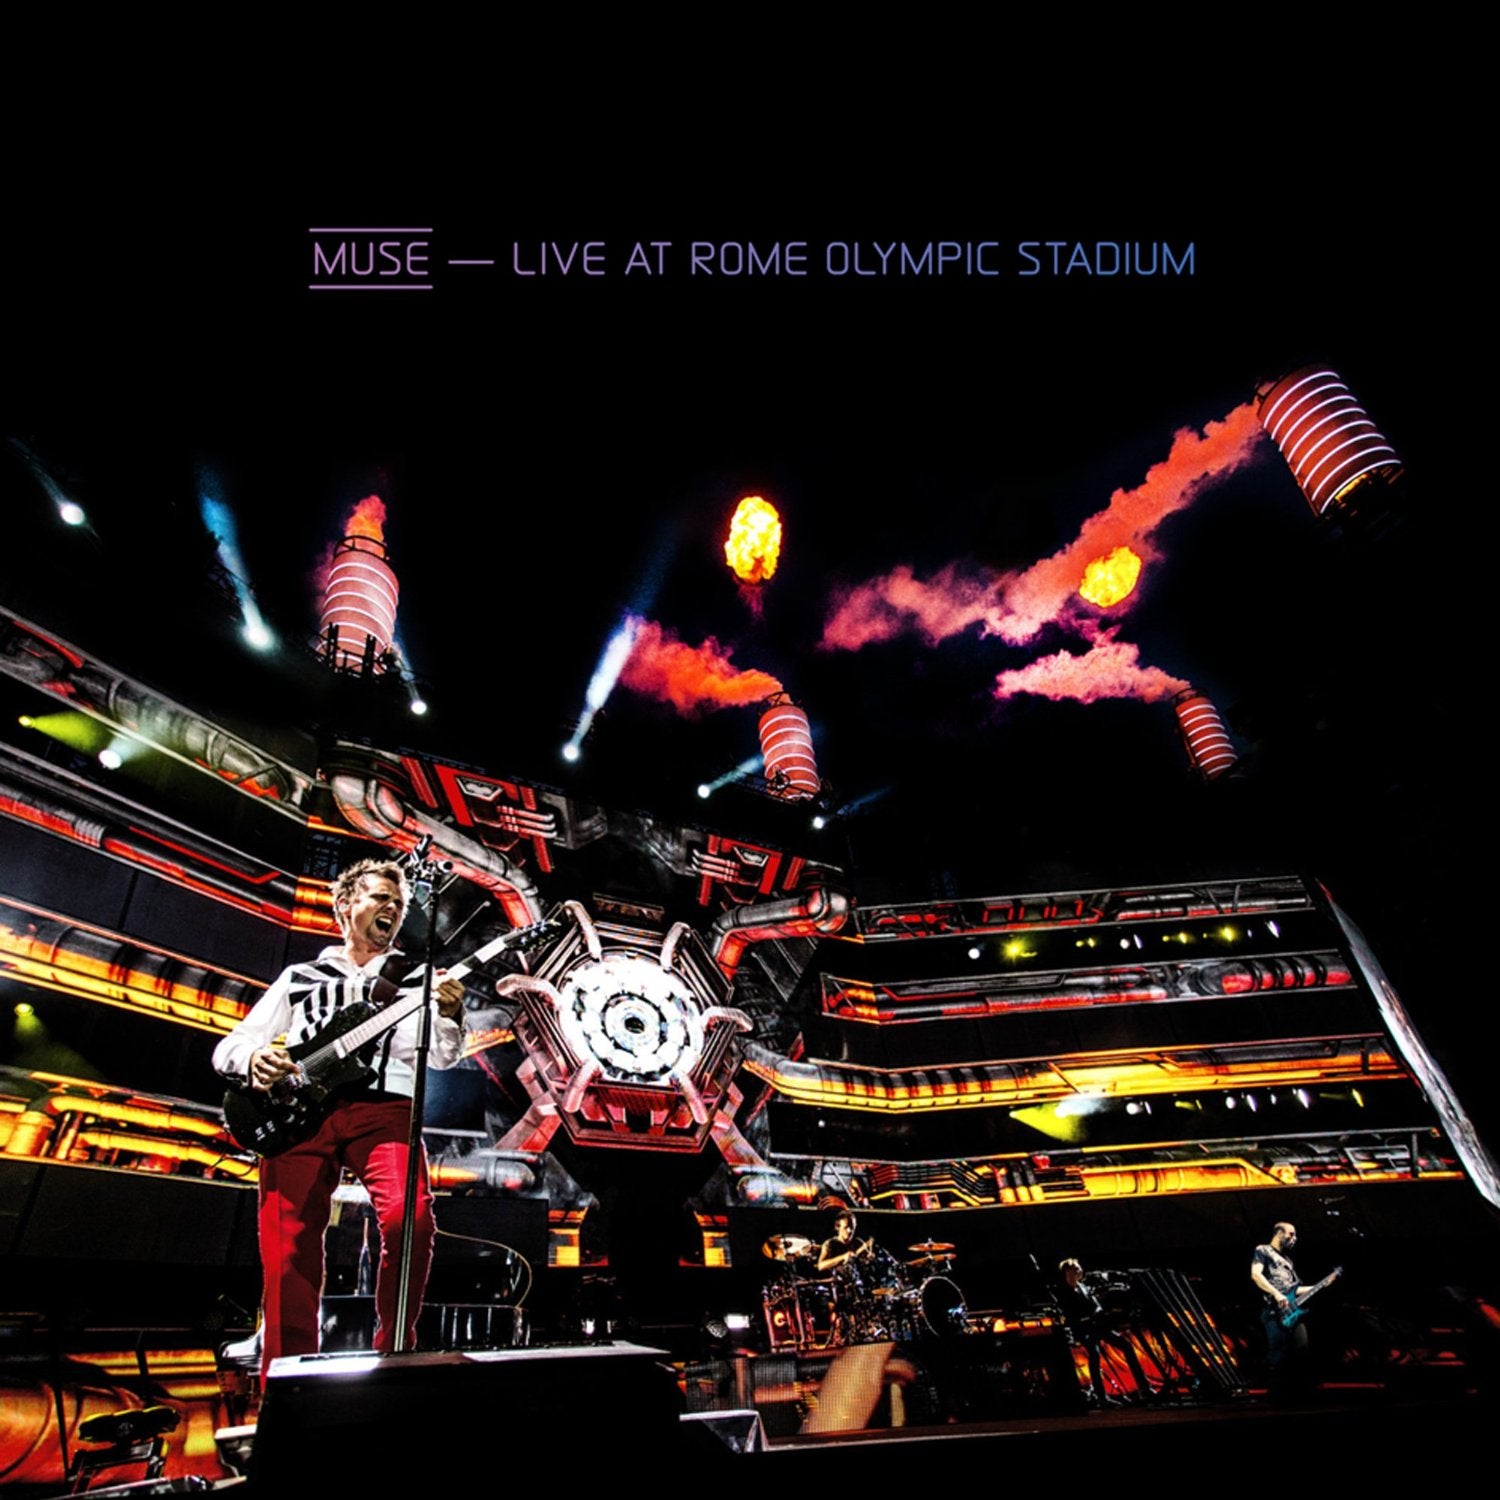 Muse "Live At Rome Olympic Stadium" CD/DVD